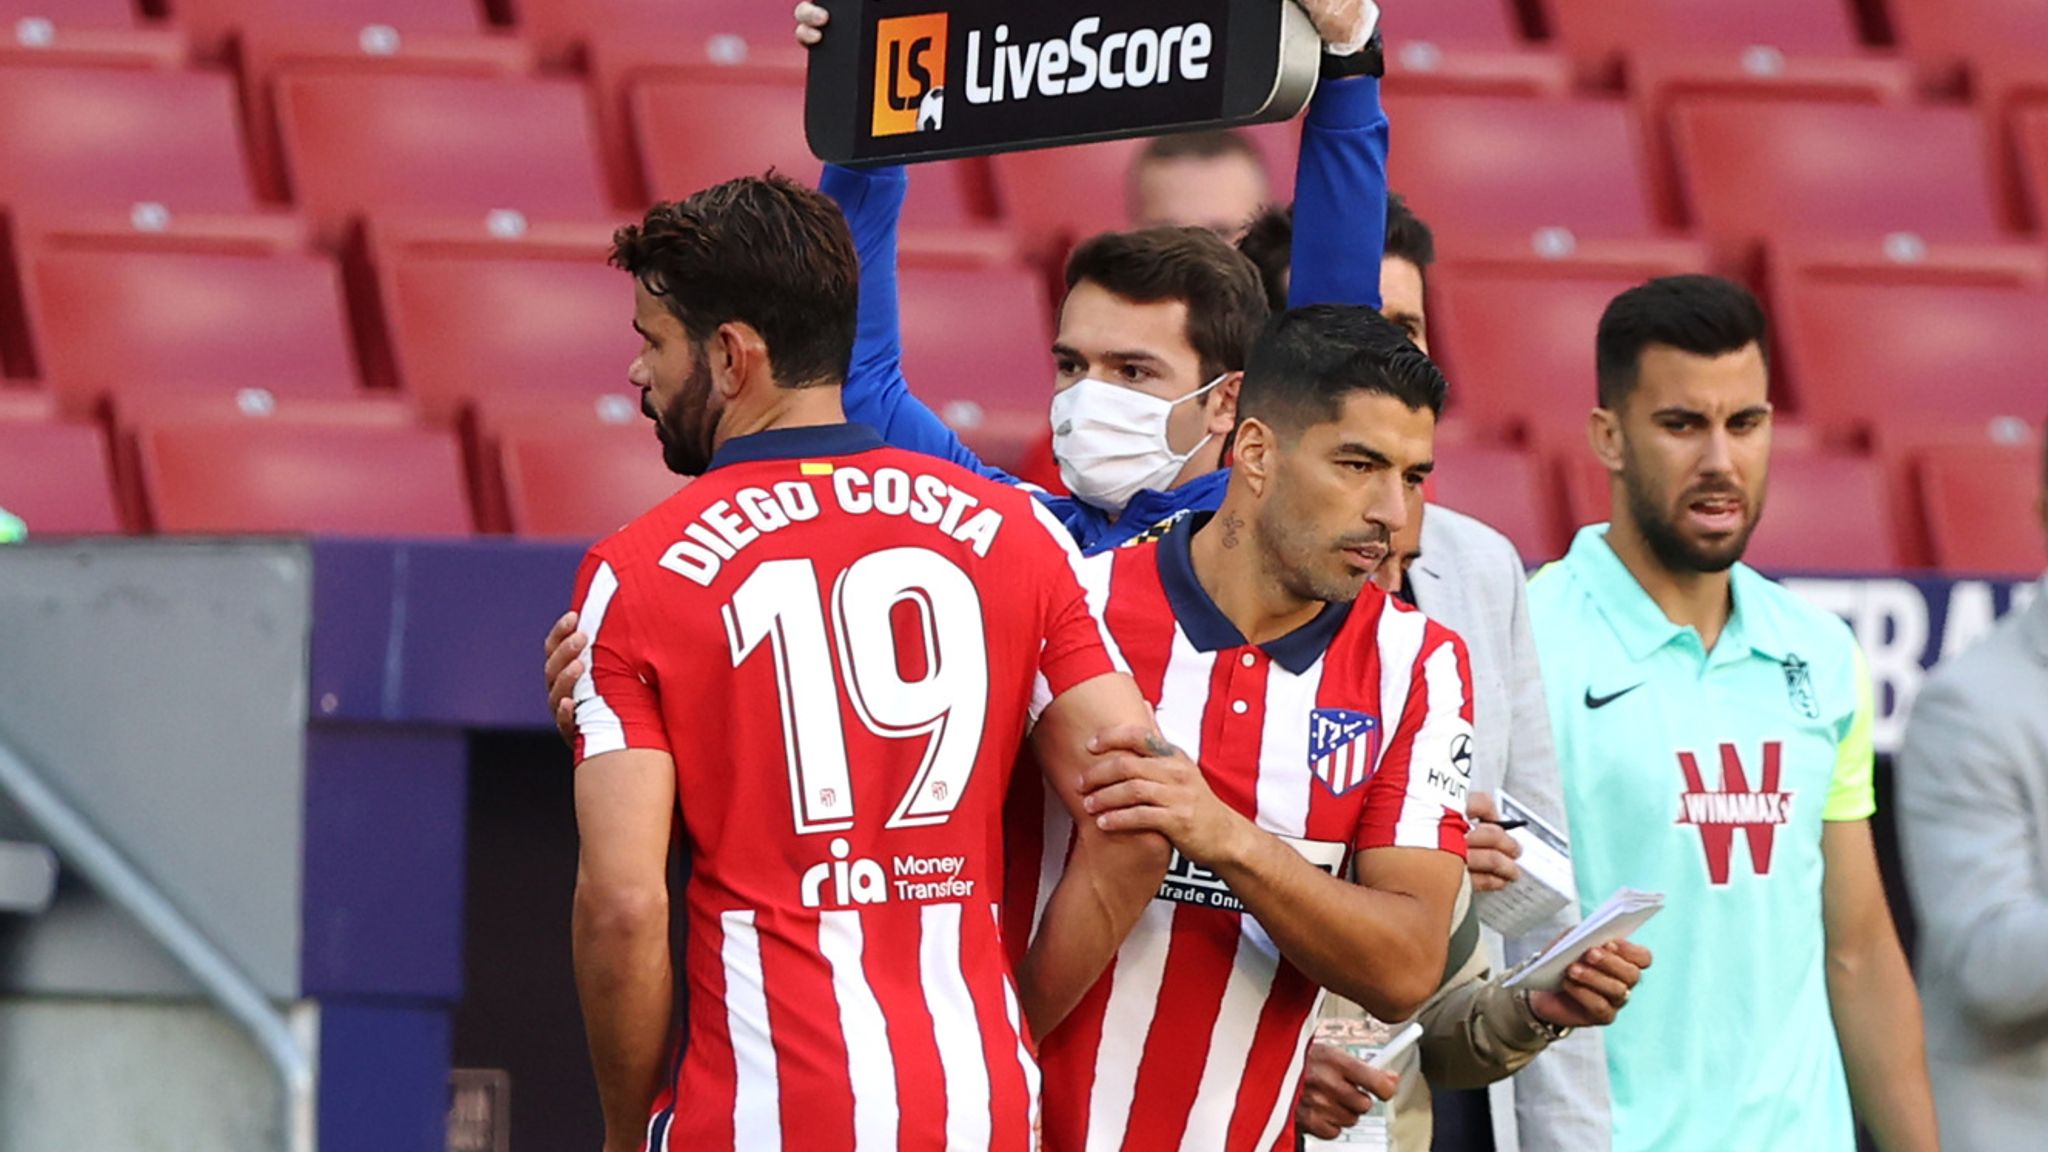 Diego Costa on Luis Suarez partnership: 'I'll do the fighting, he can do the biting'